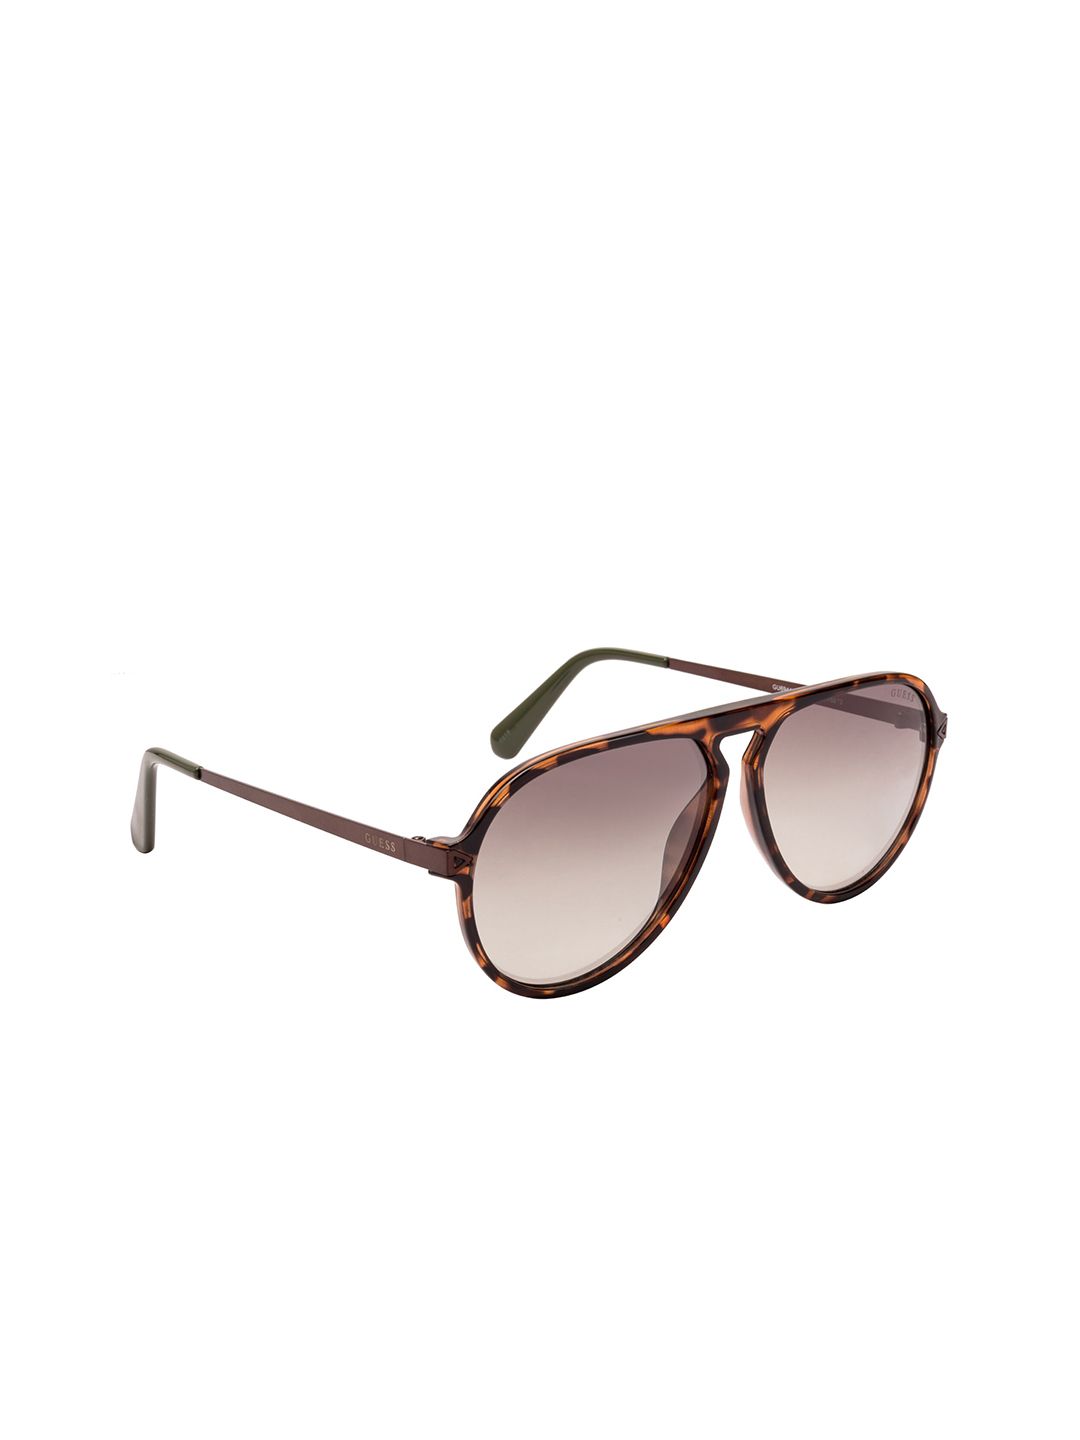 GUESS Unisex Brown Lens & Brown Aviator Sunglasses with UV Protected Lens Price in India